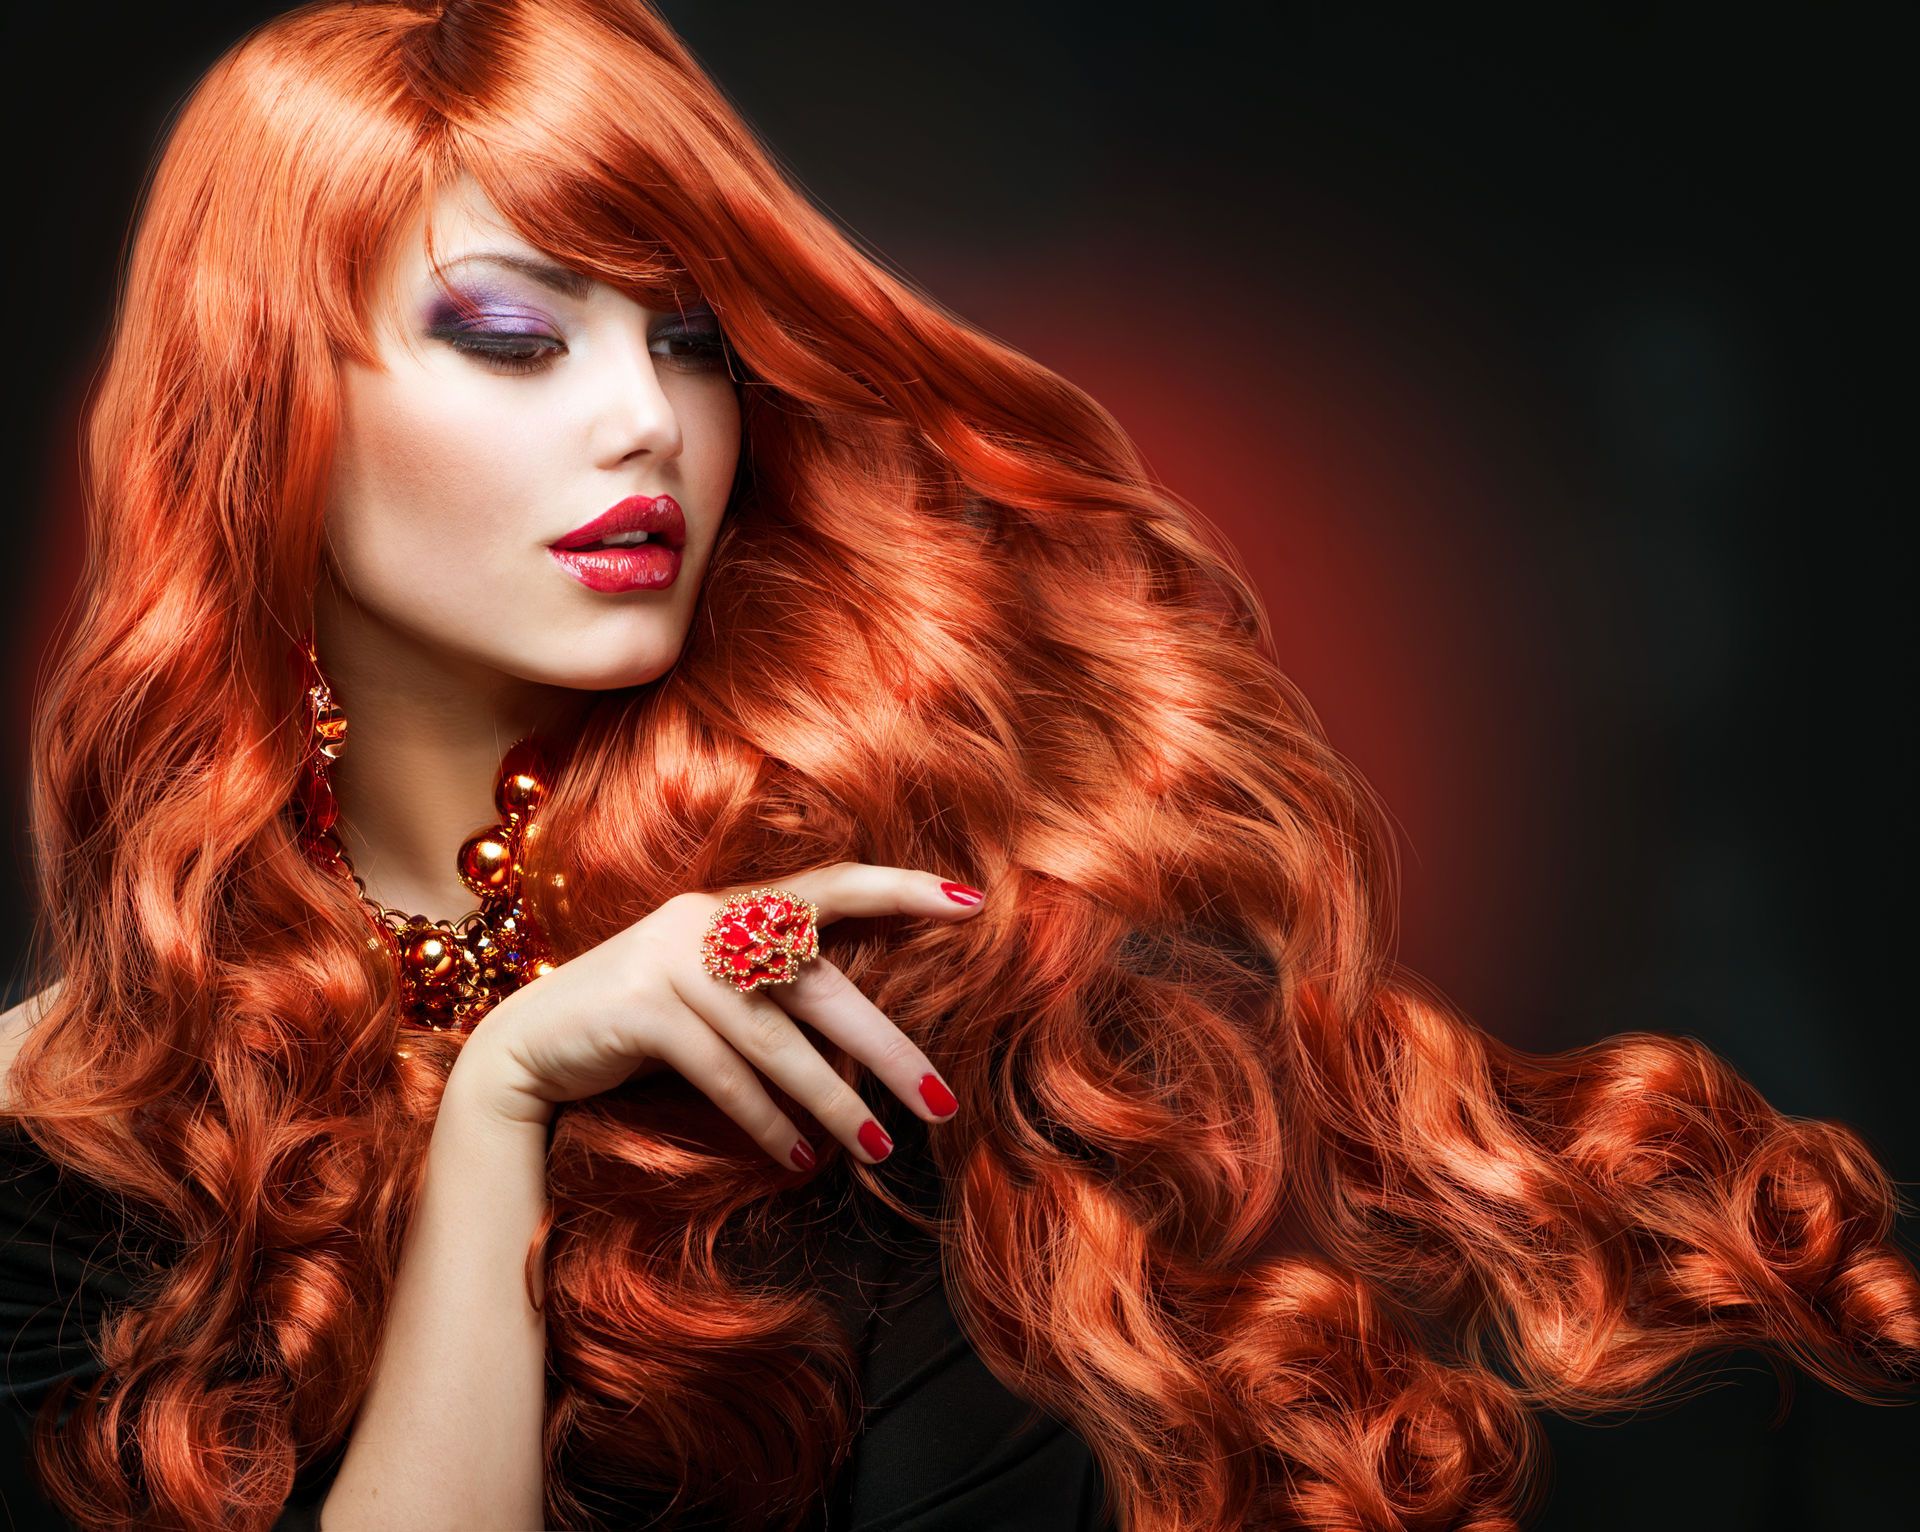 Hair Color Wallpapers - Wallpaper Cave